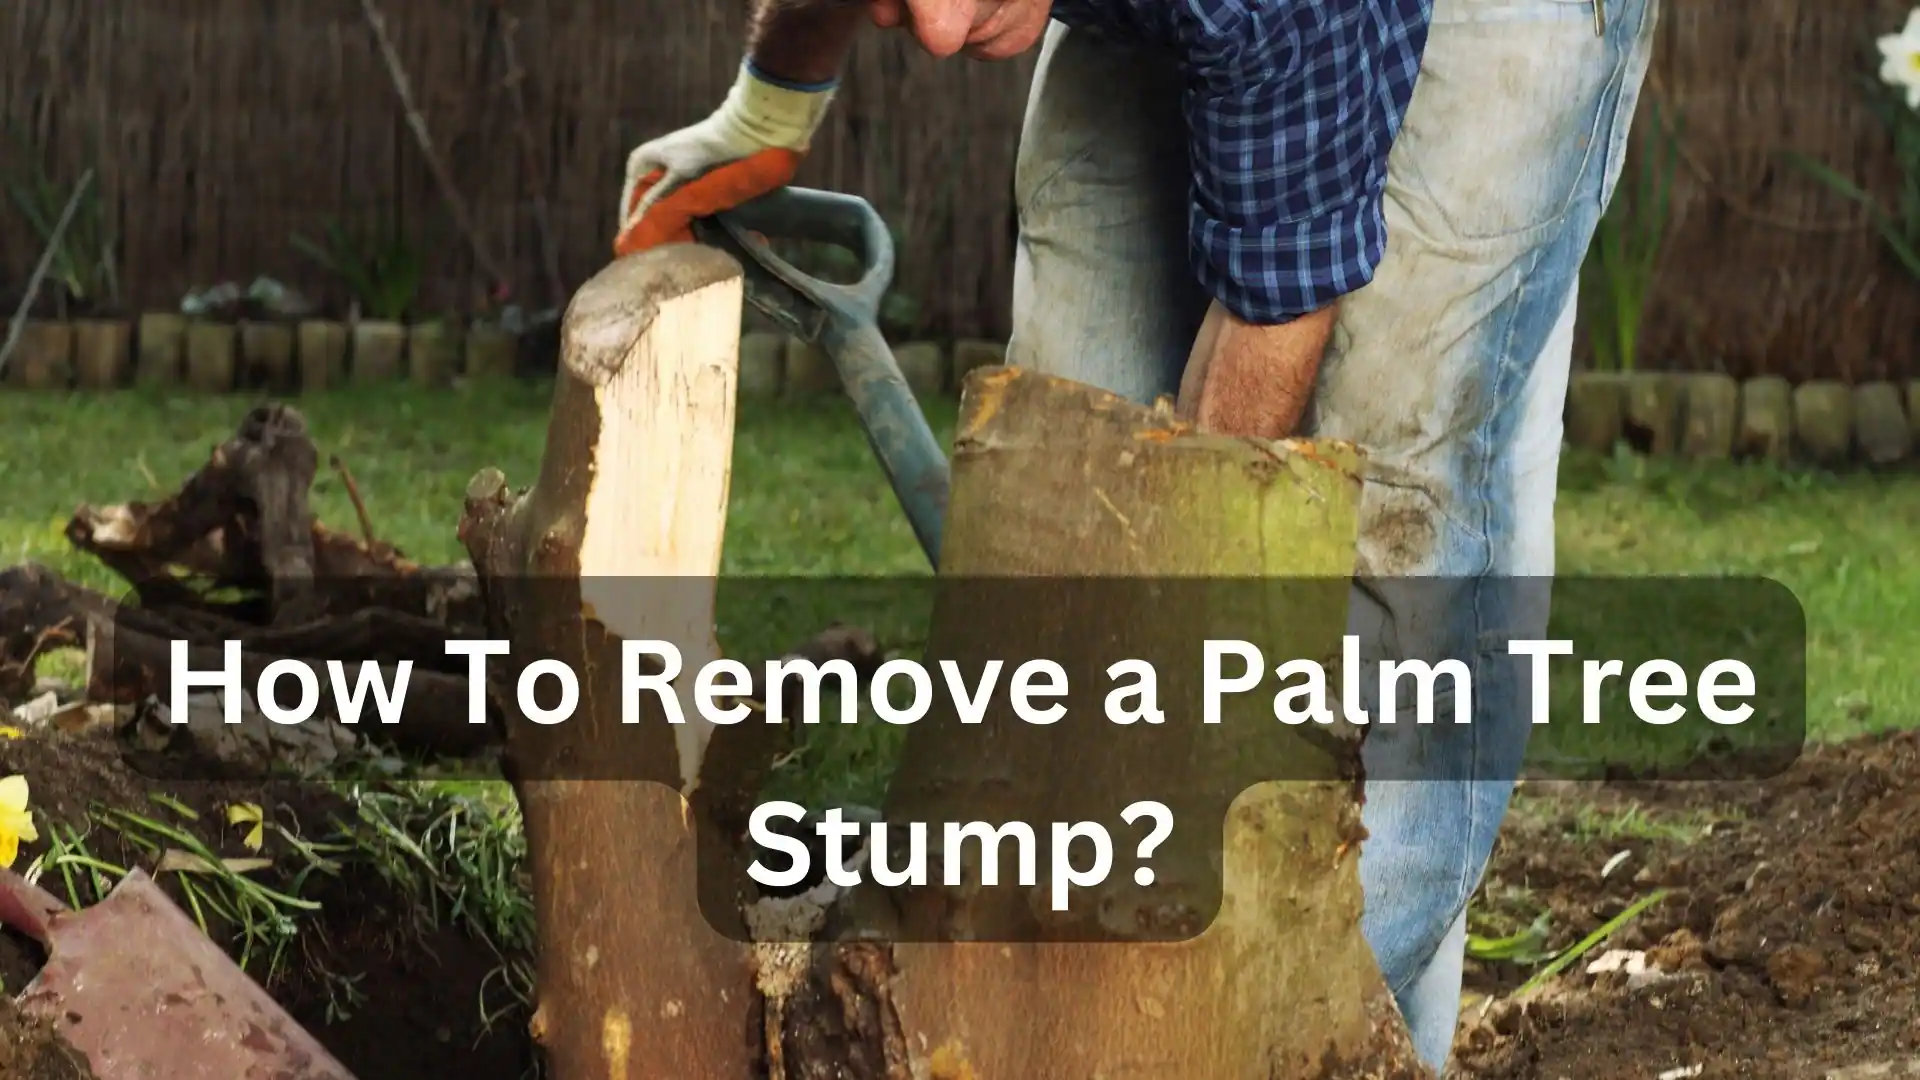 How To Remove a Palm Tree Stump?